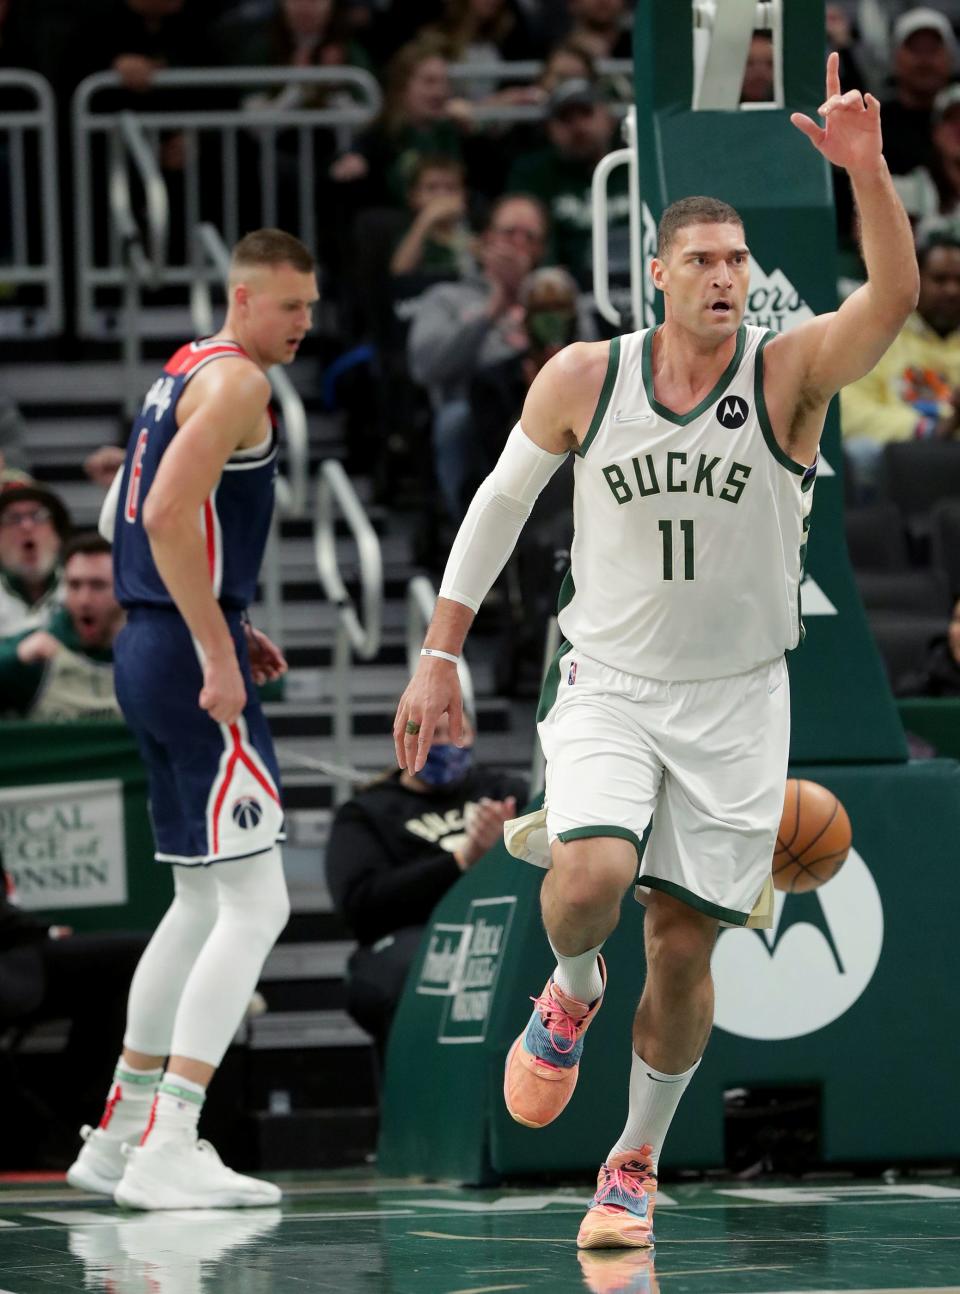 After missing most of the season with a back injury, Brook Lopez returned to the team late in the season. He's averaging 12.4 points per game in 13 games.